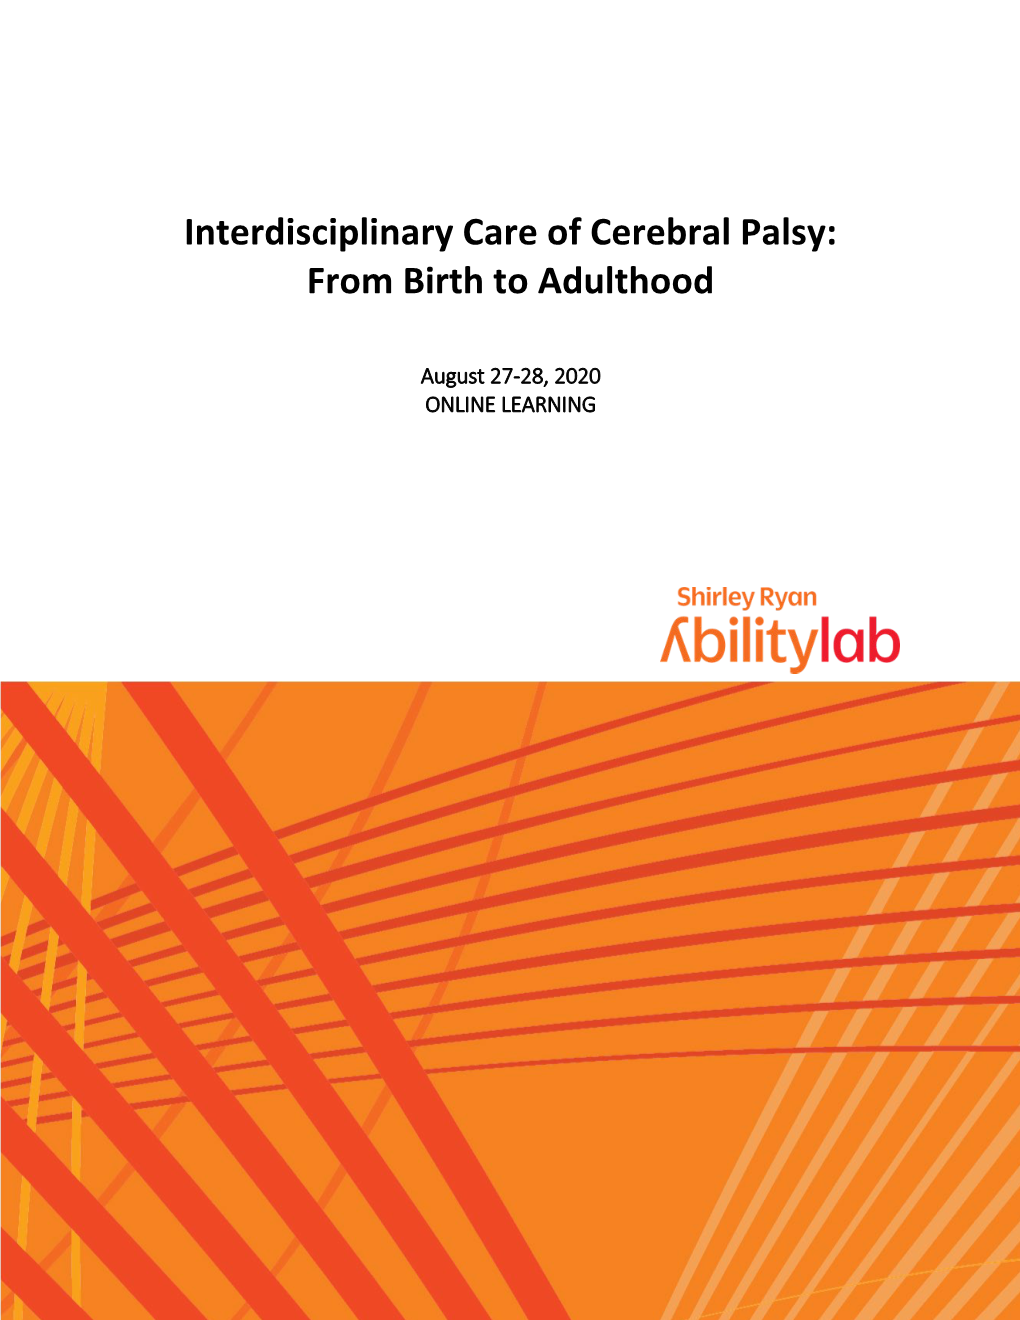 Interdisciplinary Care of Cerebral Palsy: from Birth to Adulthood